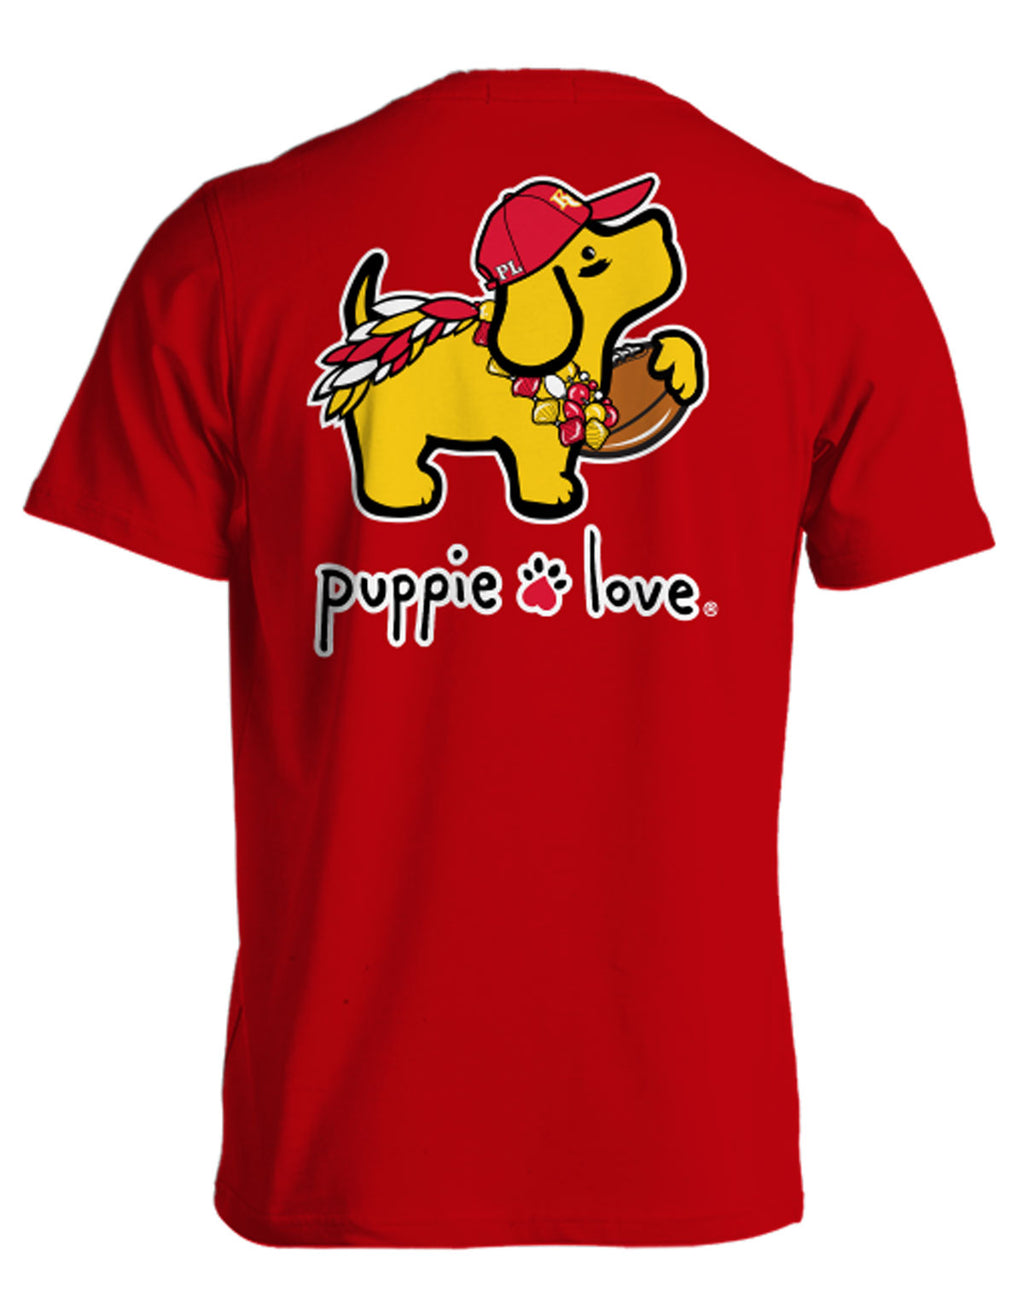 RED MASCOT PUP (PRE-ORDER, SHIPS IN 2 WEEKS) - Puppie Love